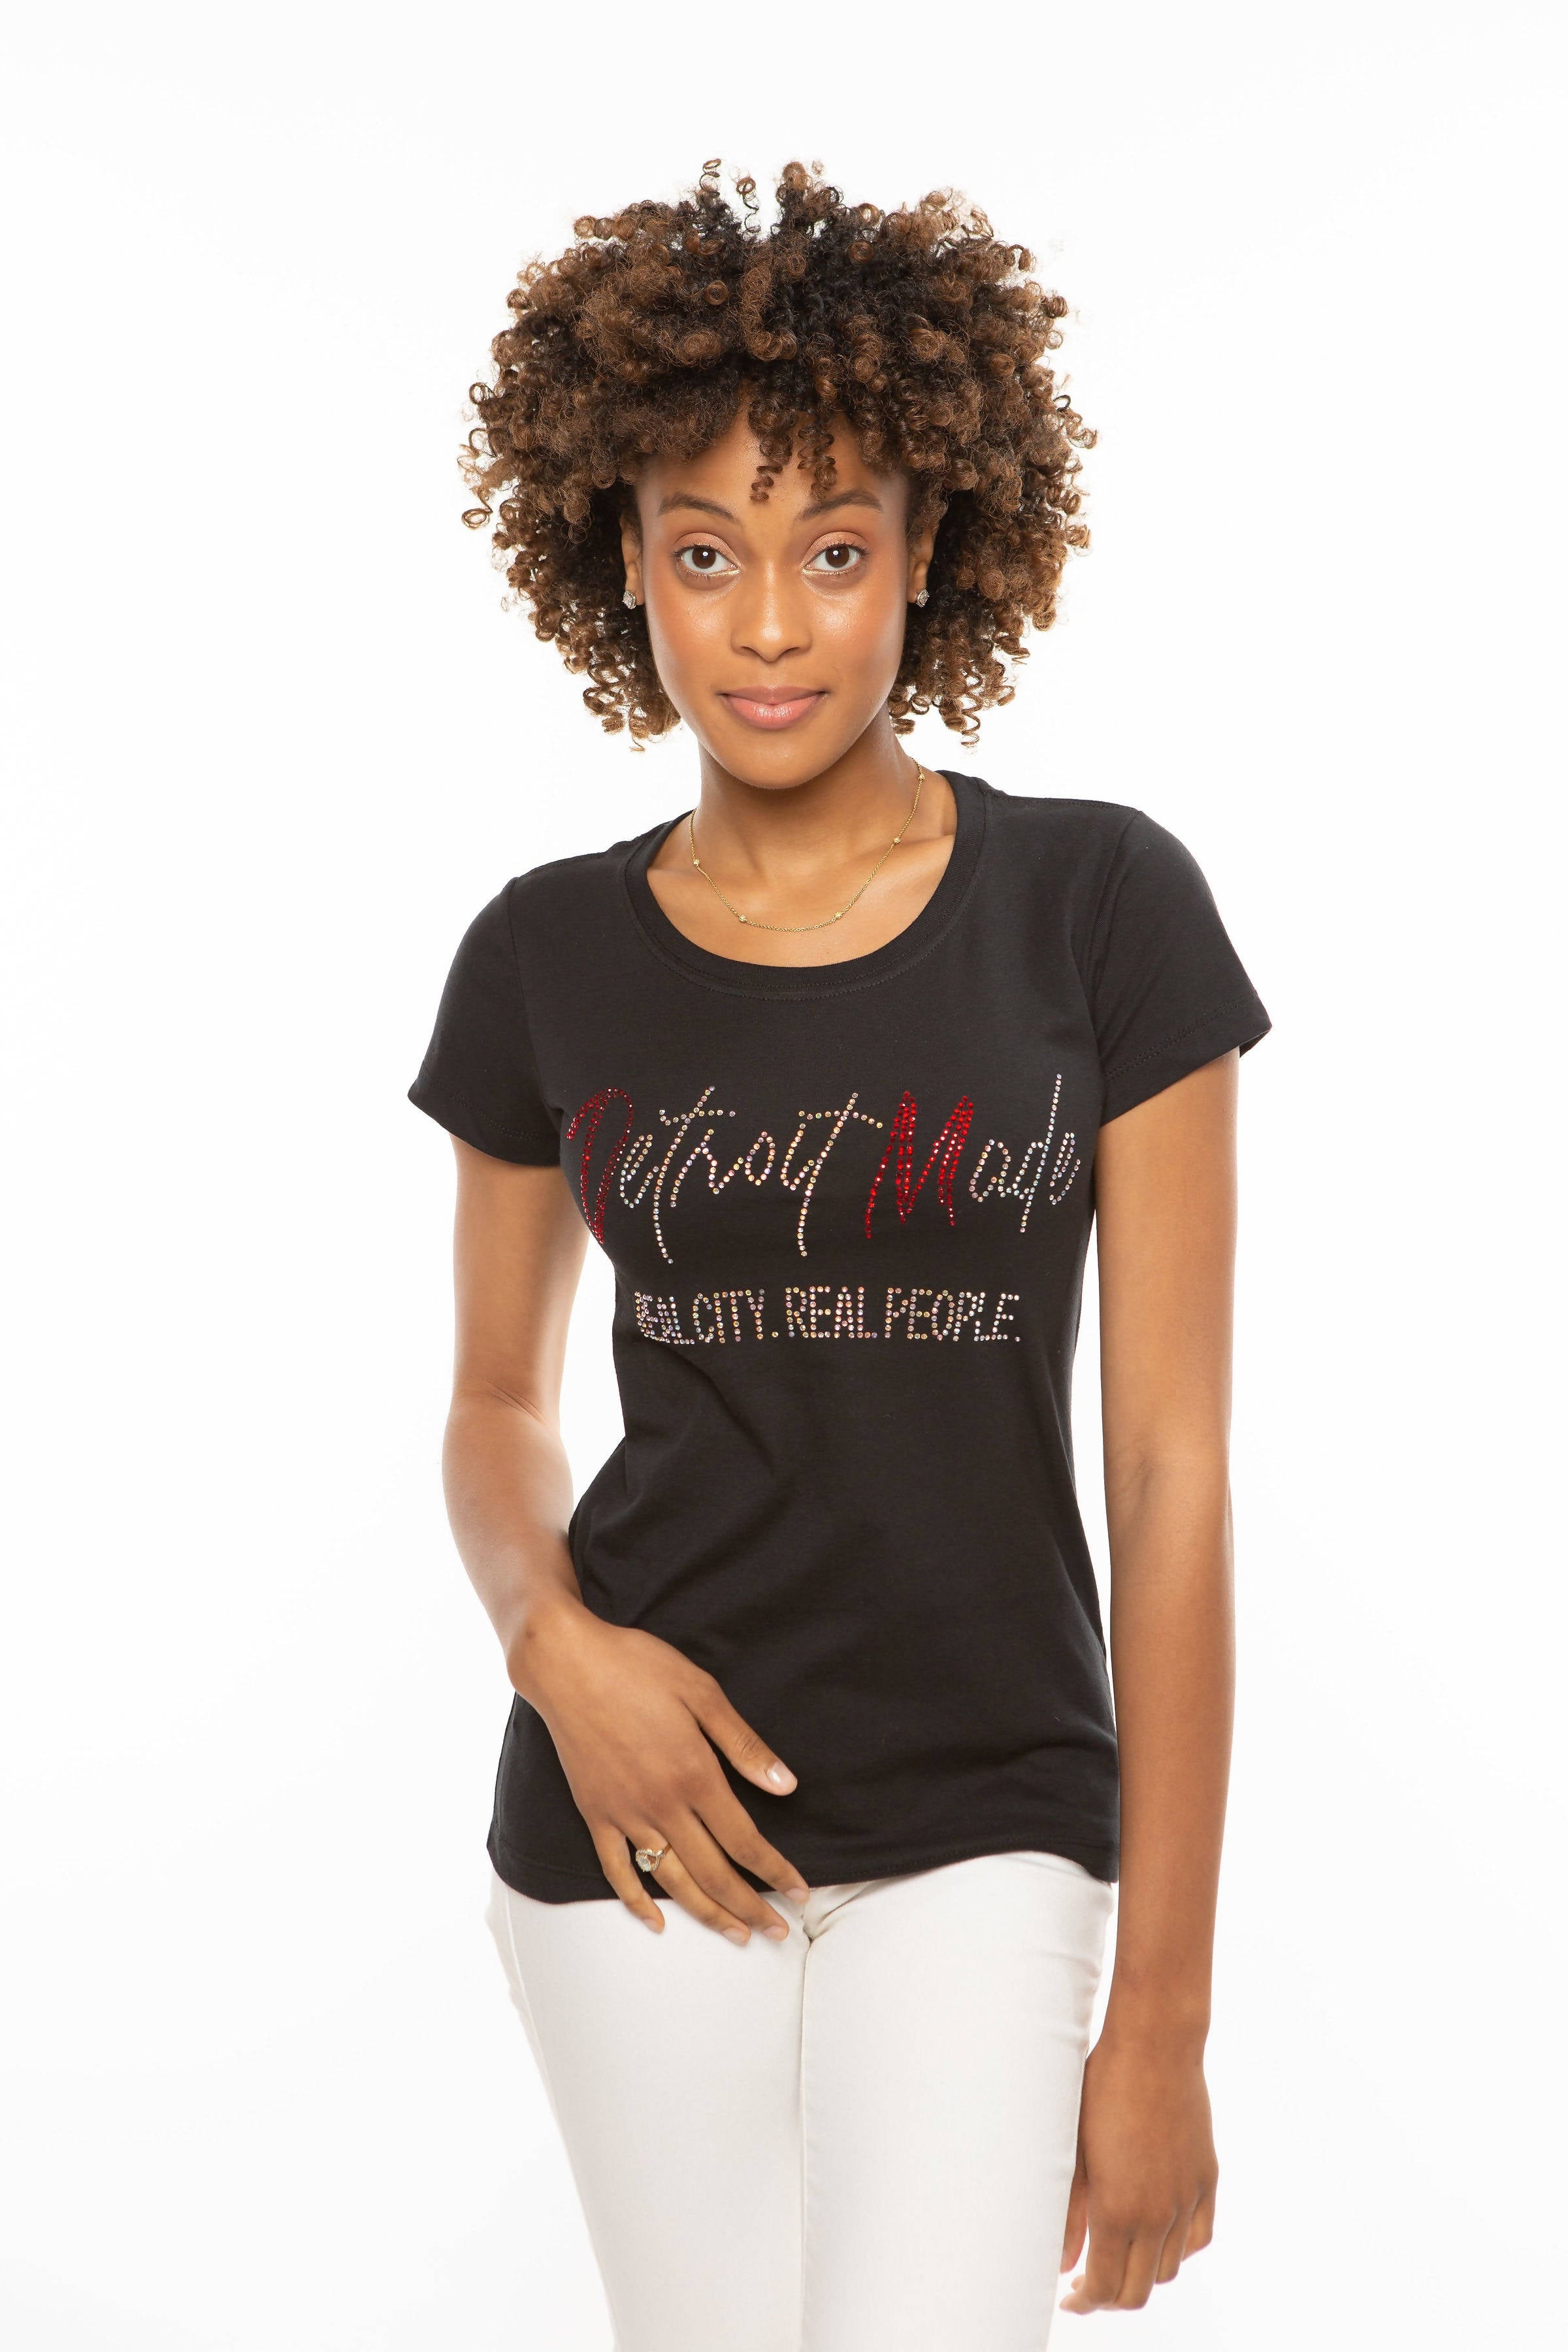 Detroit Made Women's Fitted Bling Tee - Crew Neck